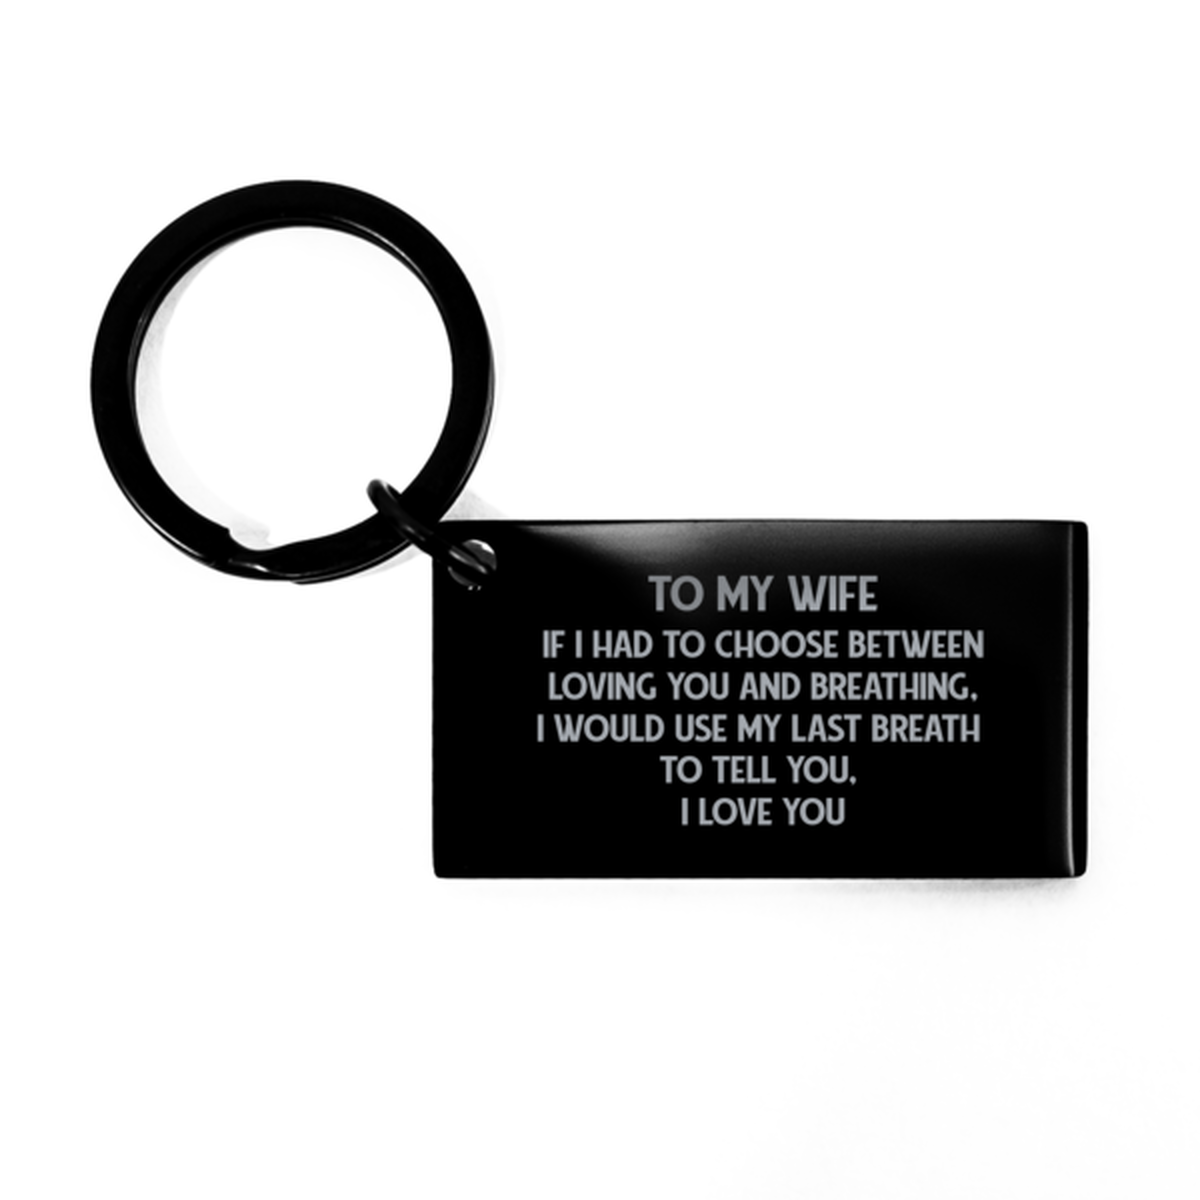 To My Wife Black Keychain, Loving You, Birthday Gifts For Wife From Husband, Valentines Gifts For Women